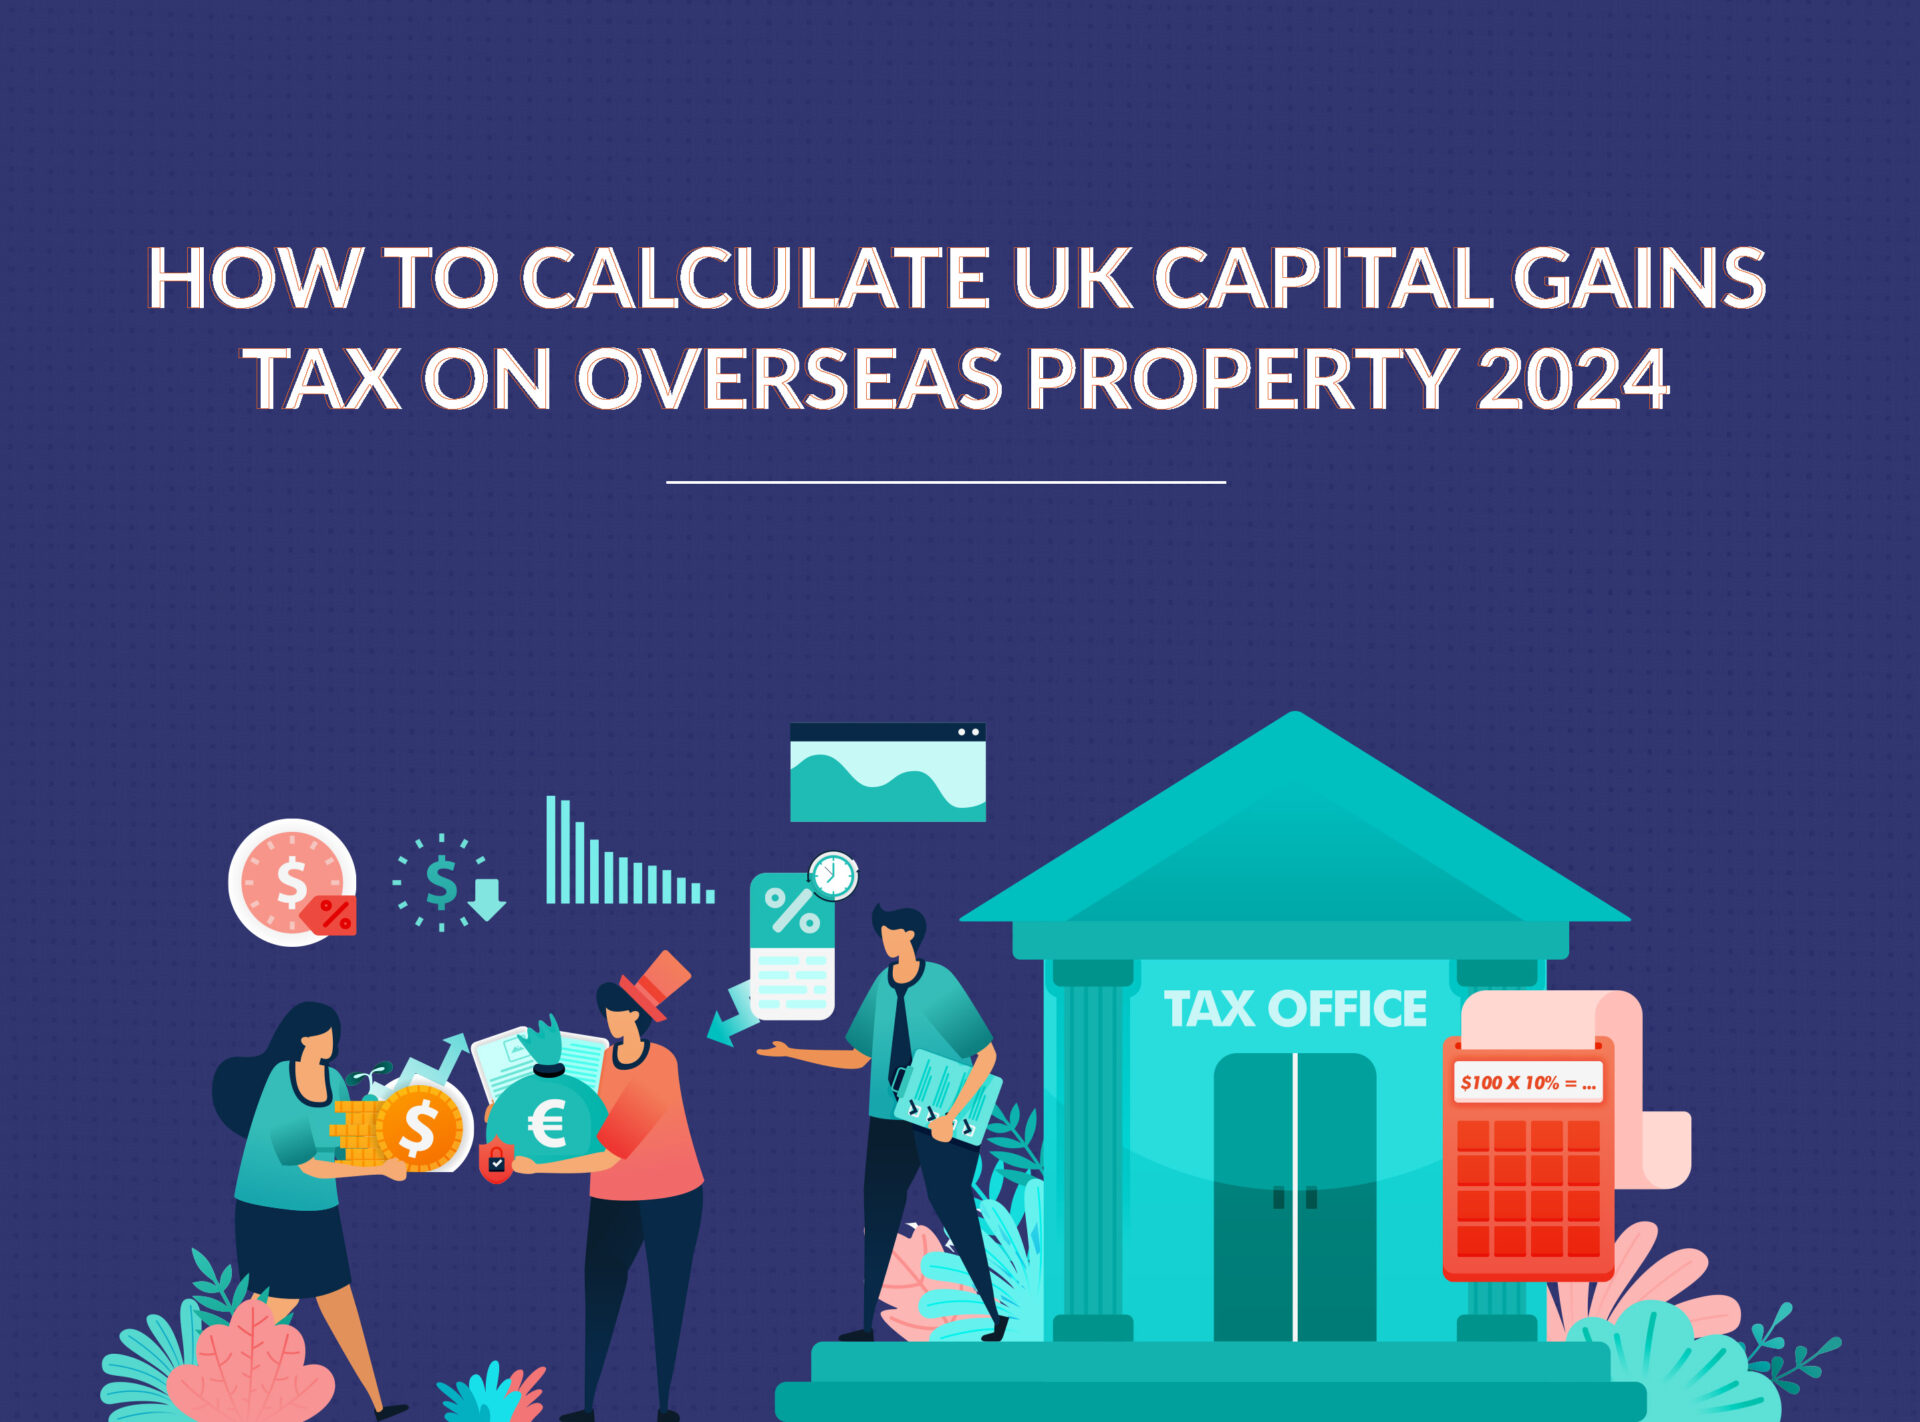 How to Calculate UK Capital Gains Tax on Overseas Property 2024